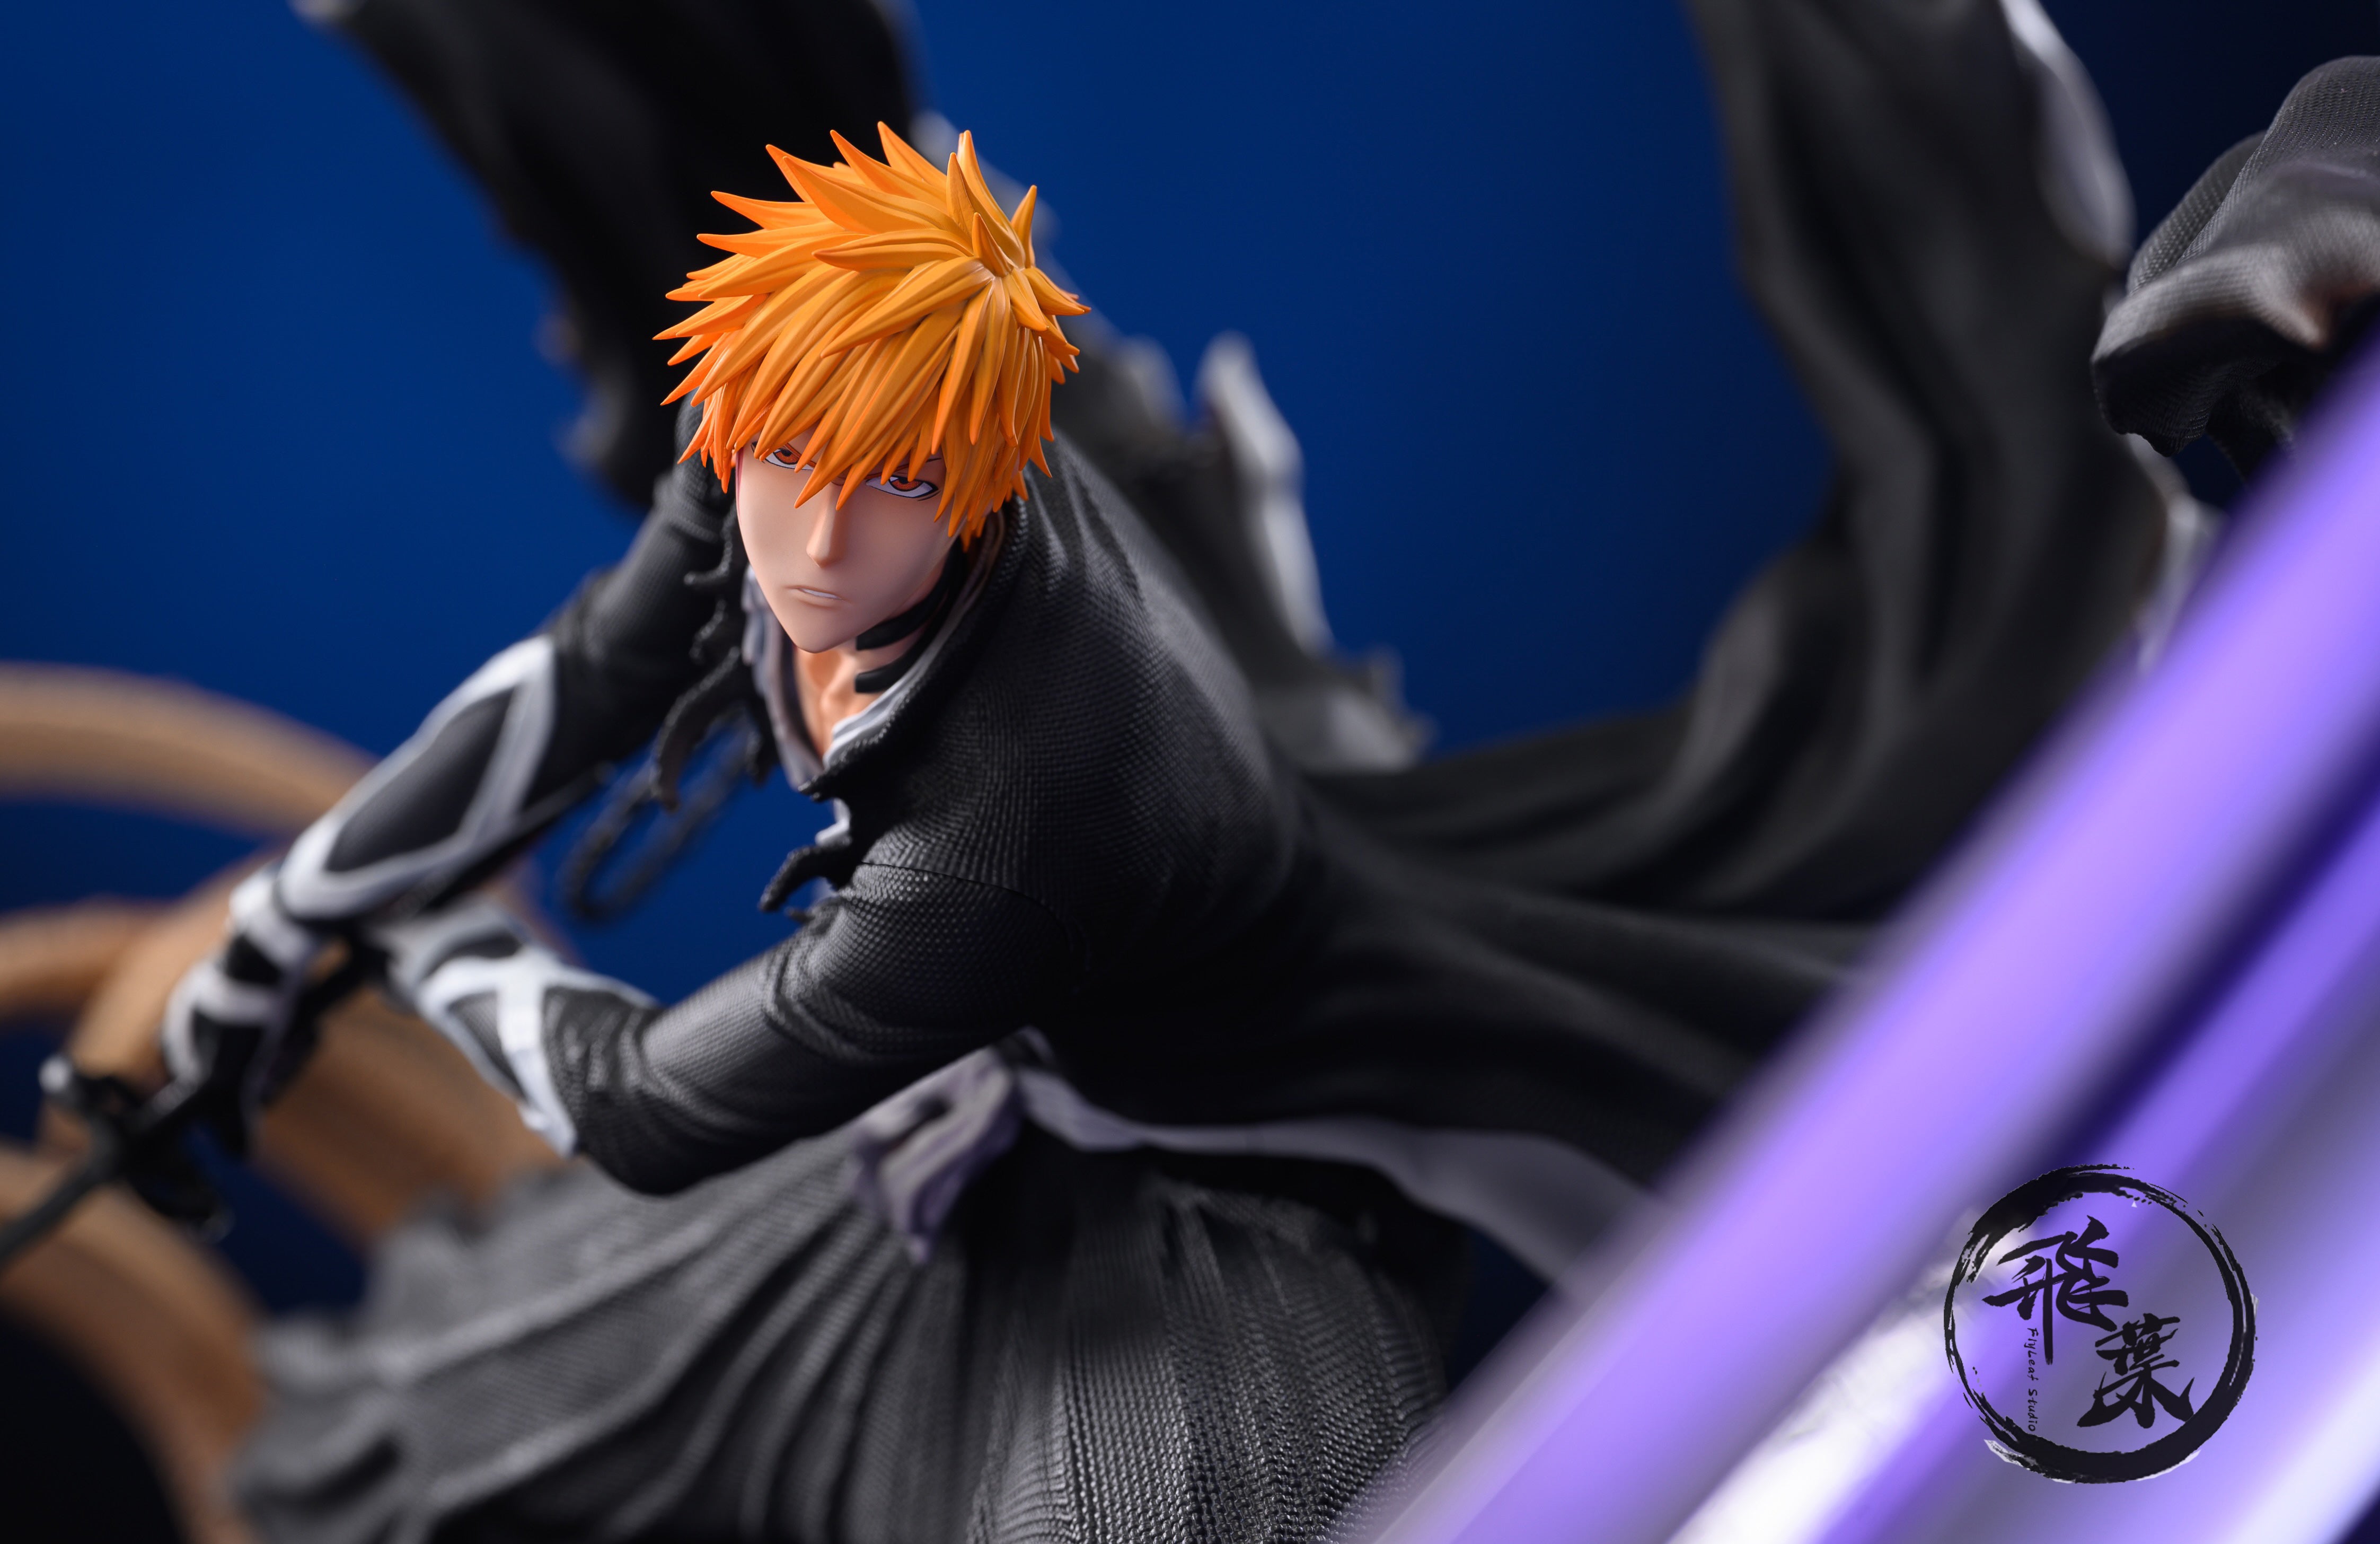 Buy Bleach Statue Online In India - Etsy India